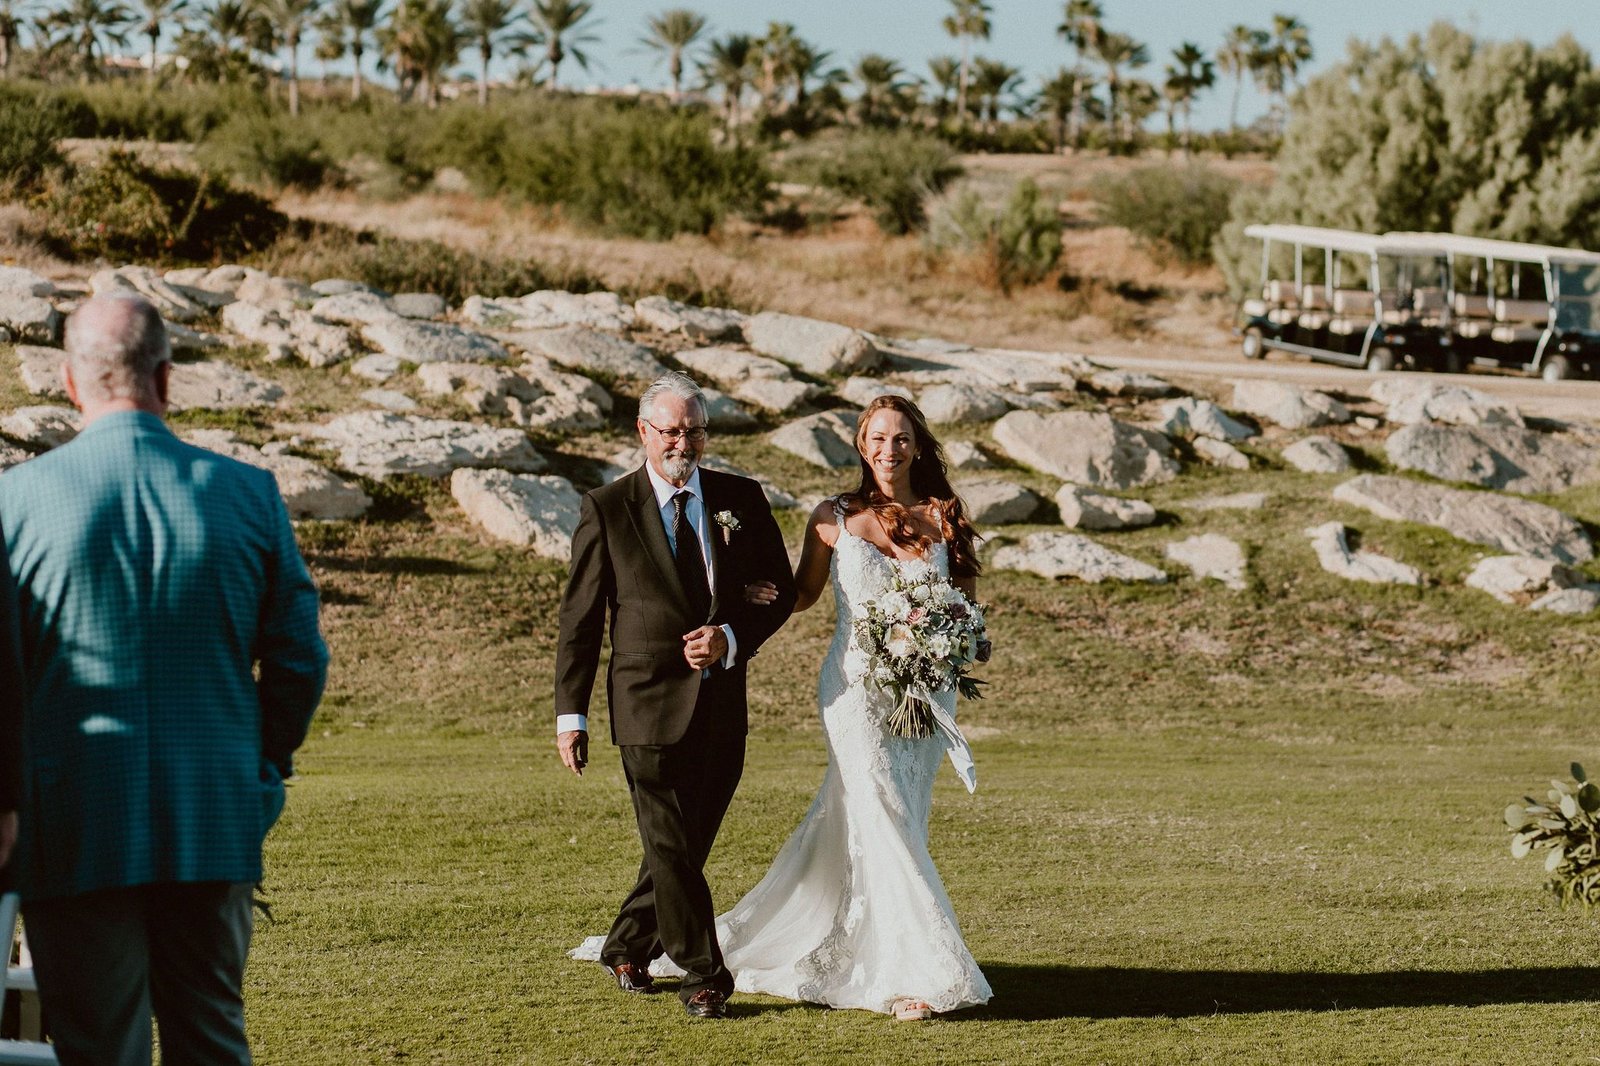 Bride with her dad walking down the Ceremony Aisle at Cabo del Sol Gold Club House. Her Wedding was in Cabo San Lucas, Mexico. Destination Wedding Planning by Cabo Wedding Services.